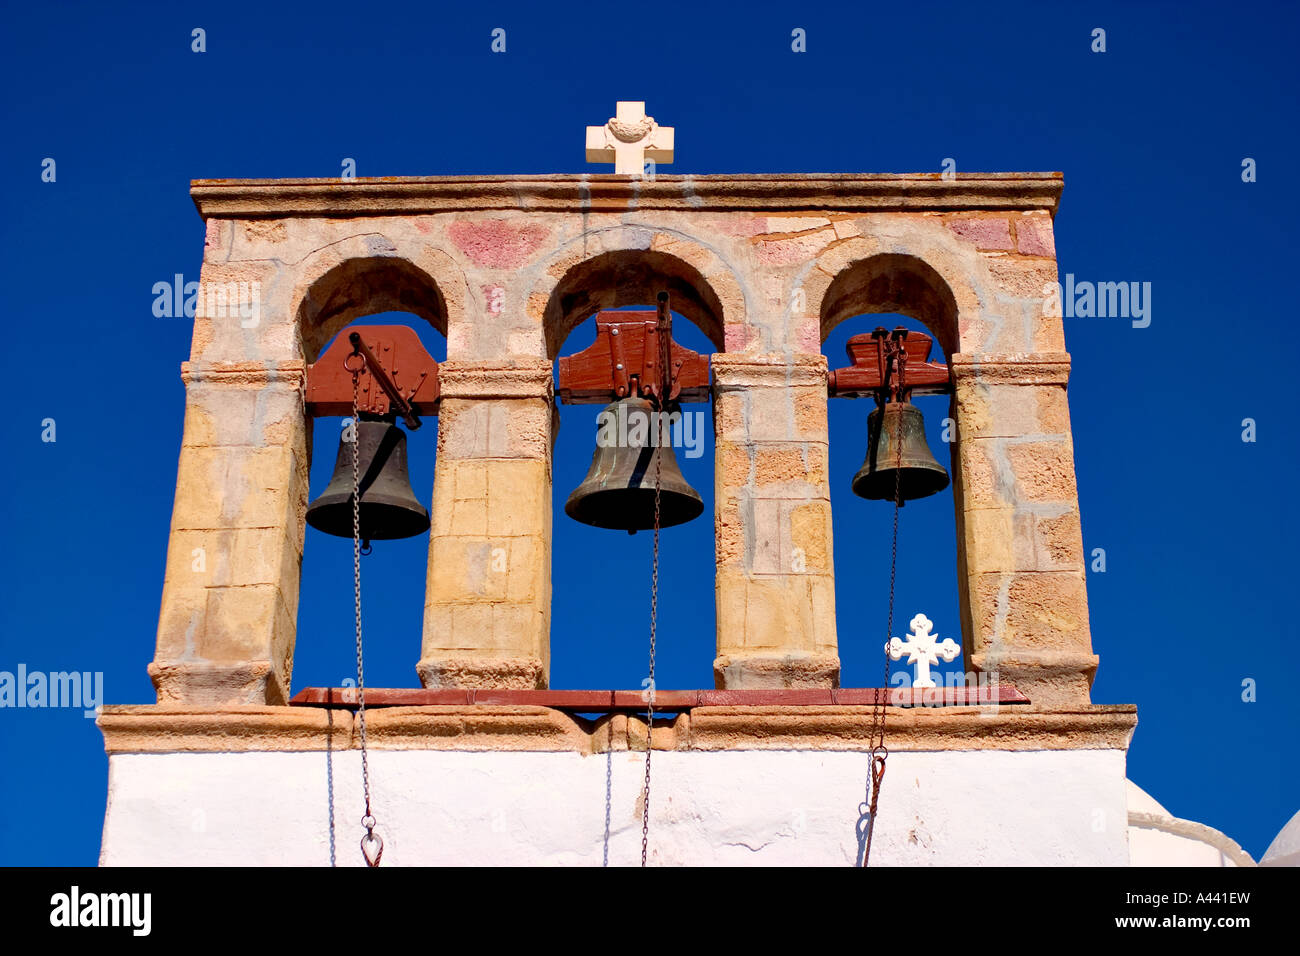 bells in the monastery of St John the Disciple Patmos Dodecanese Islands Greece Stock Photo